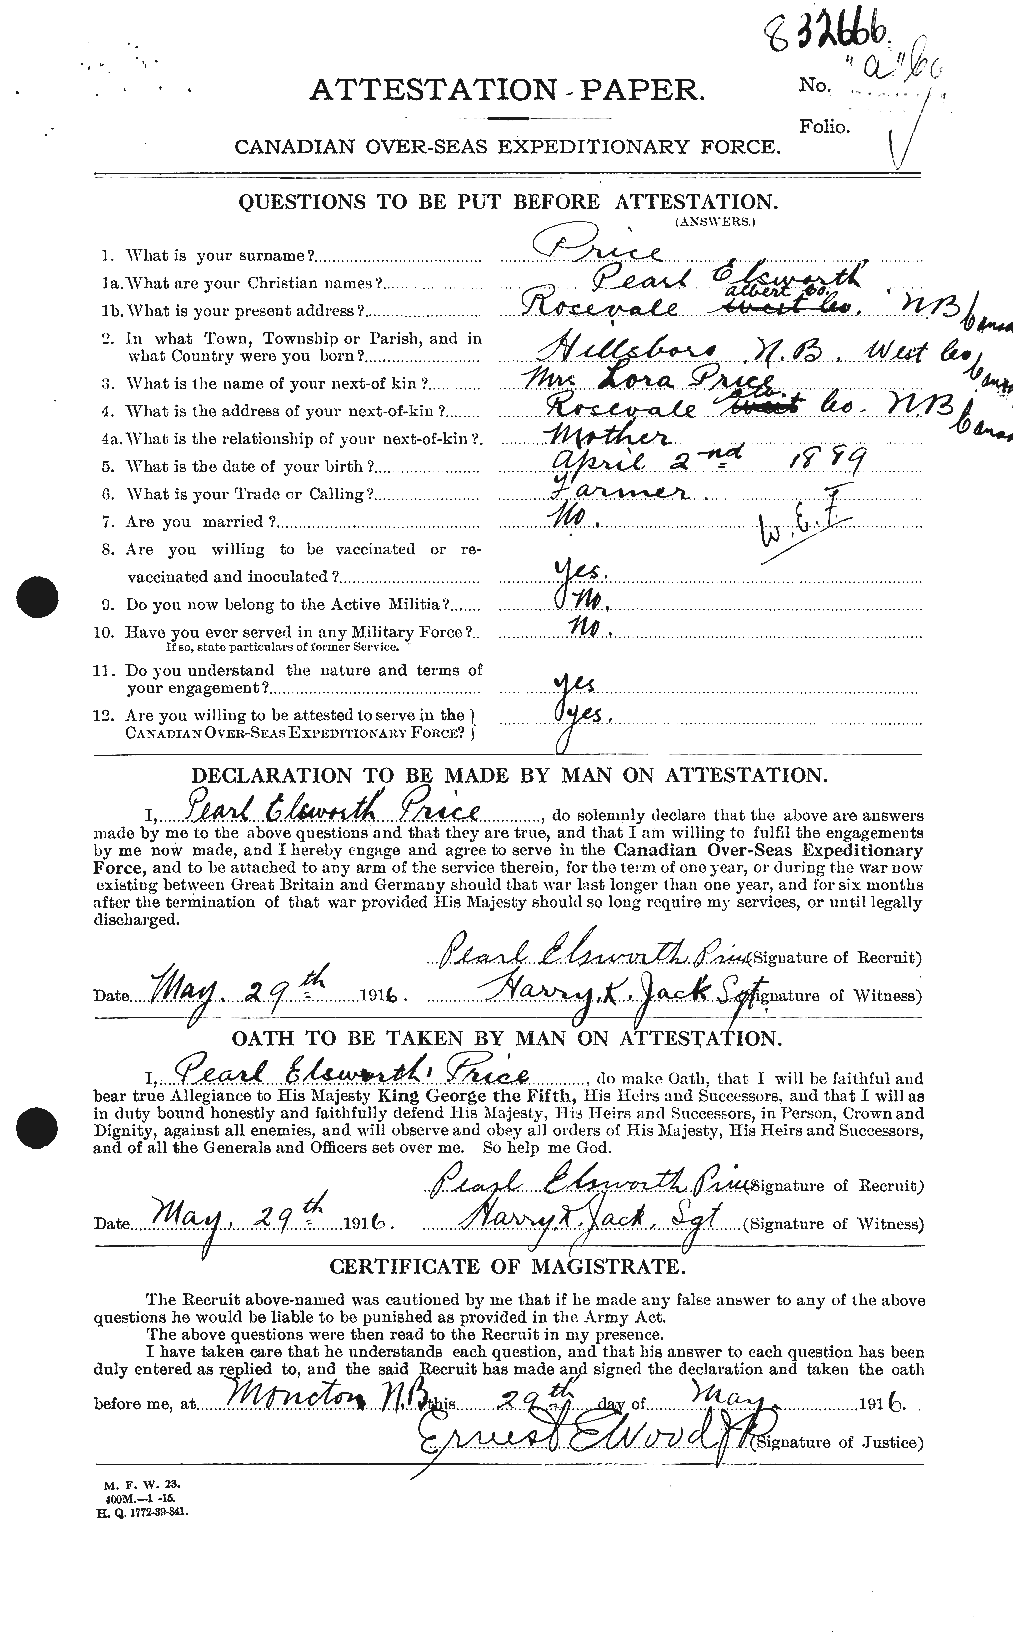 Personnel Records of the First World War - CEF 587303a